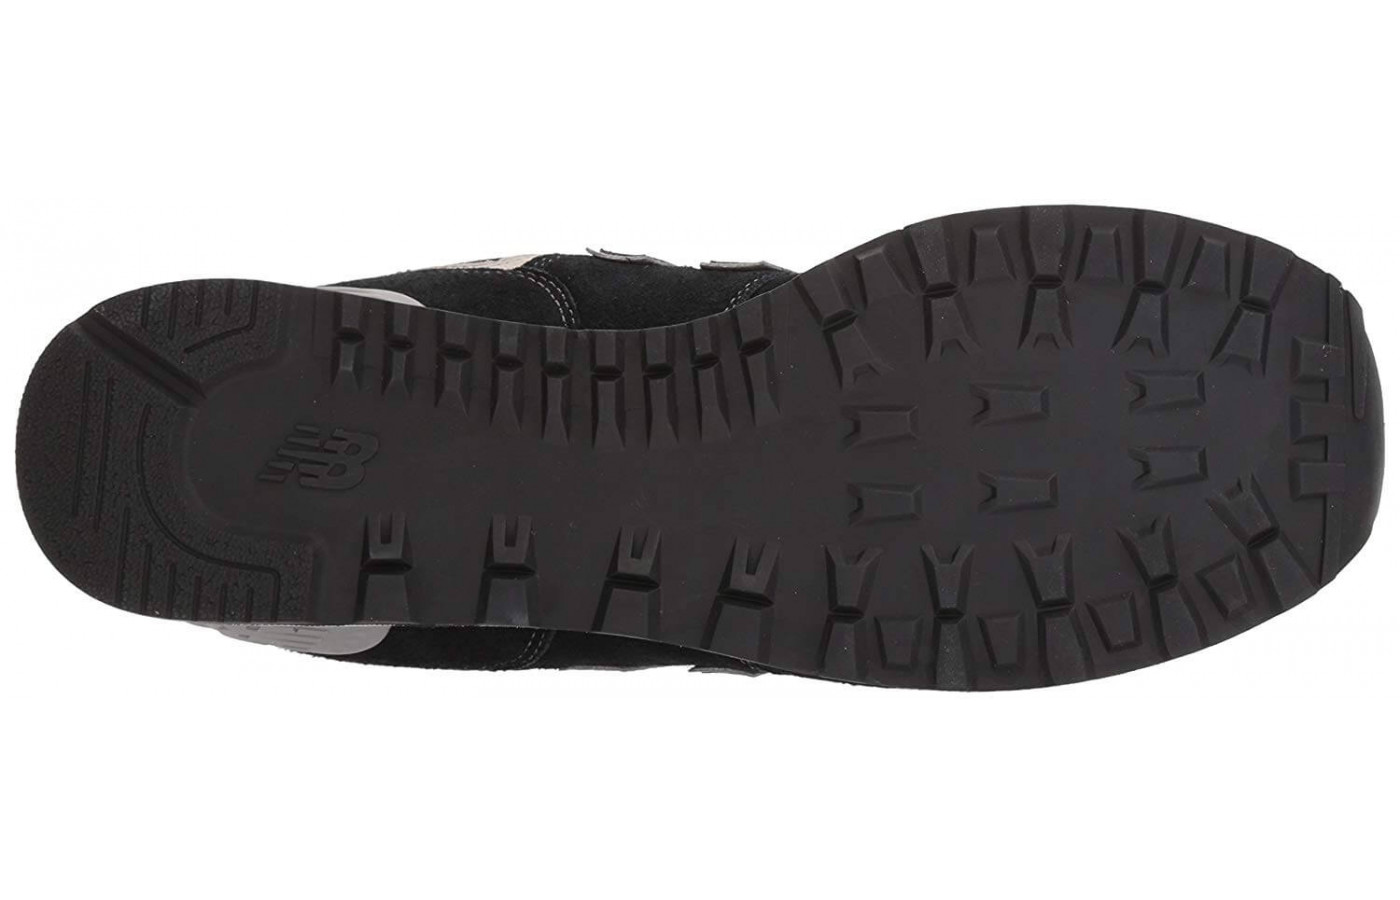 The 574 features a basic rubber outsole